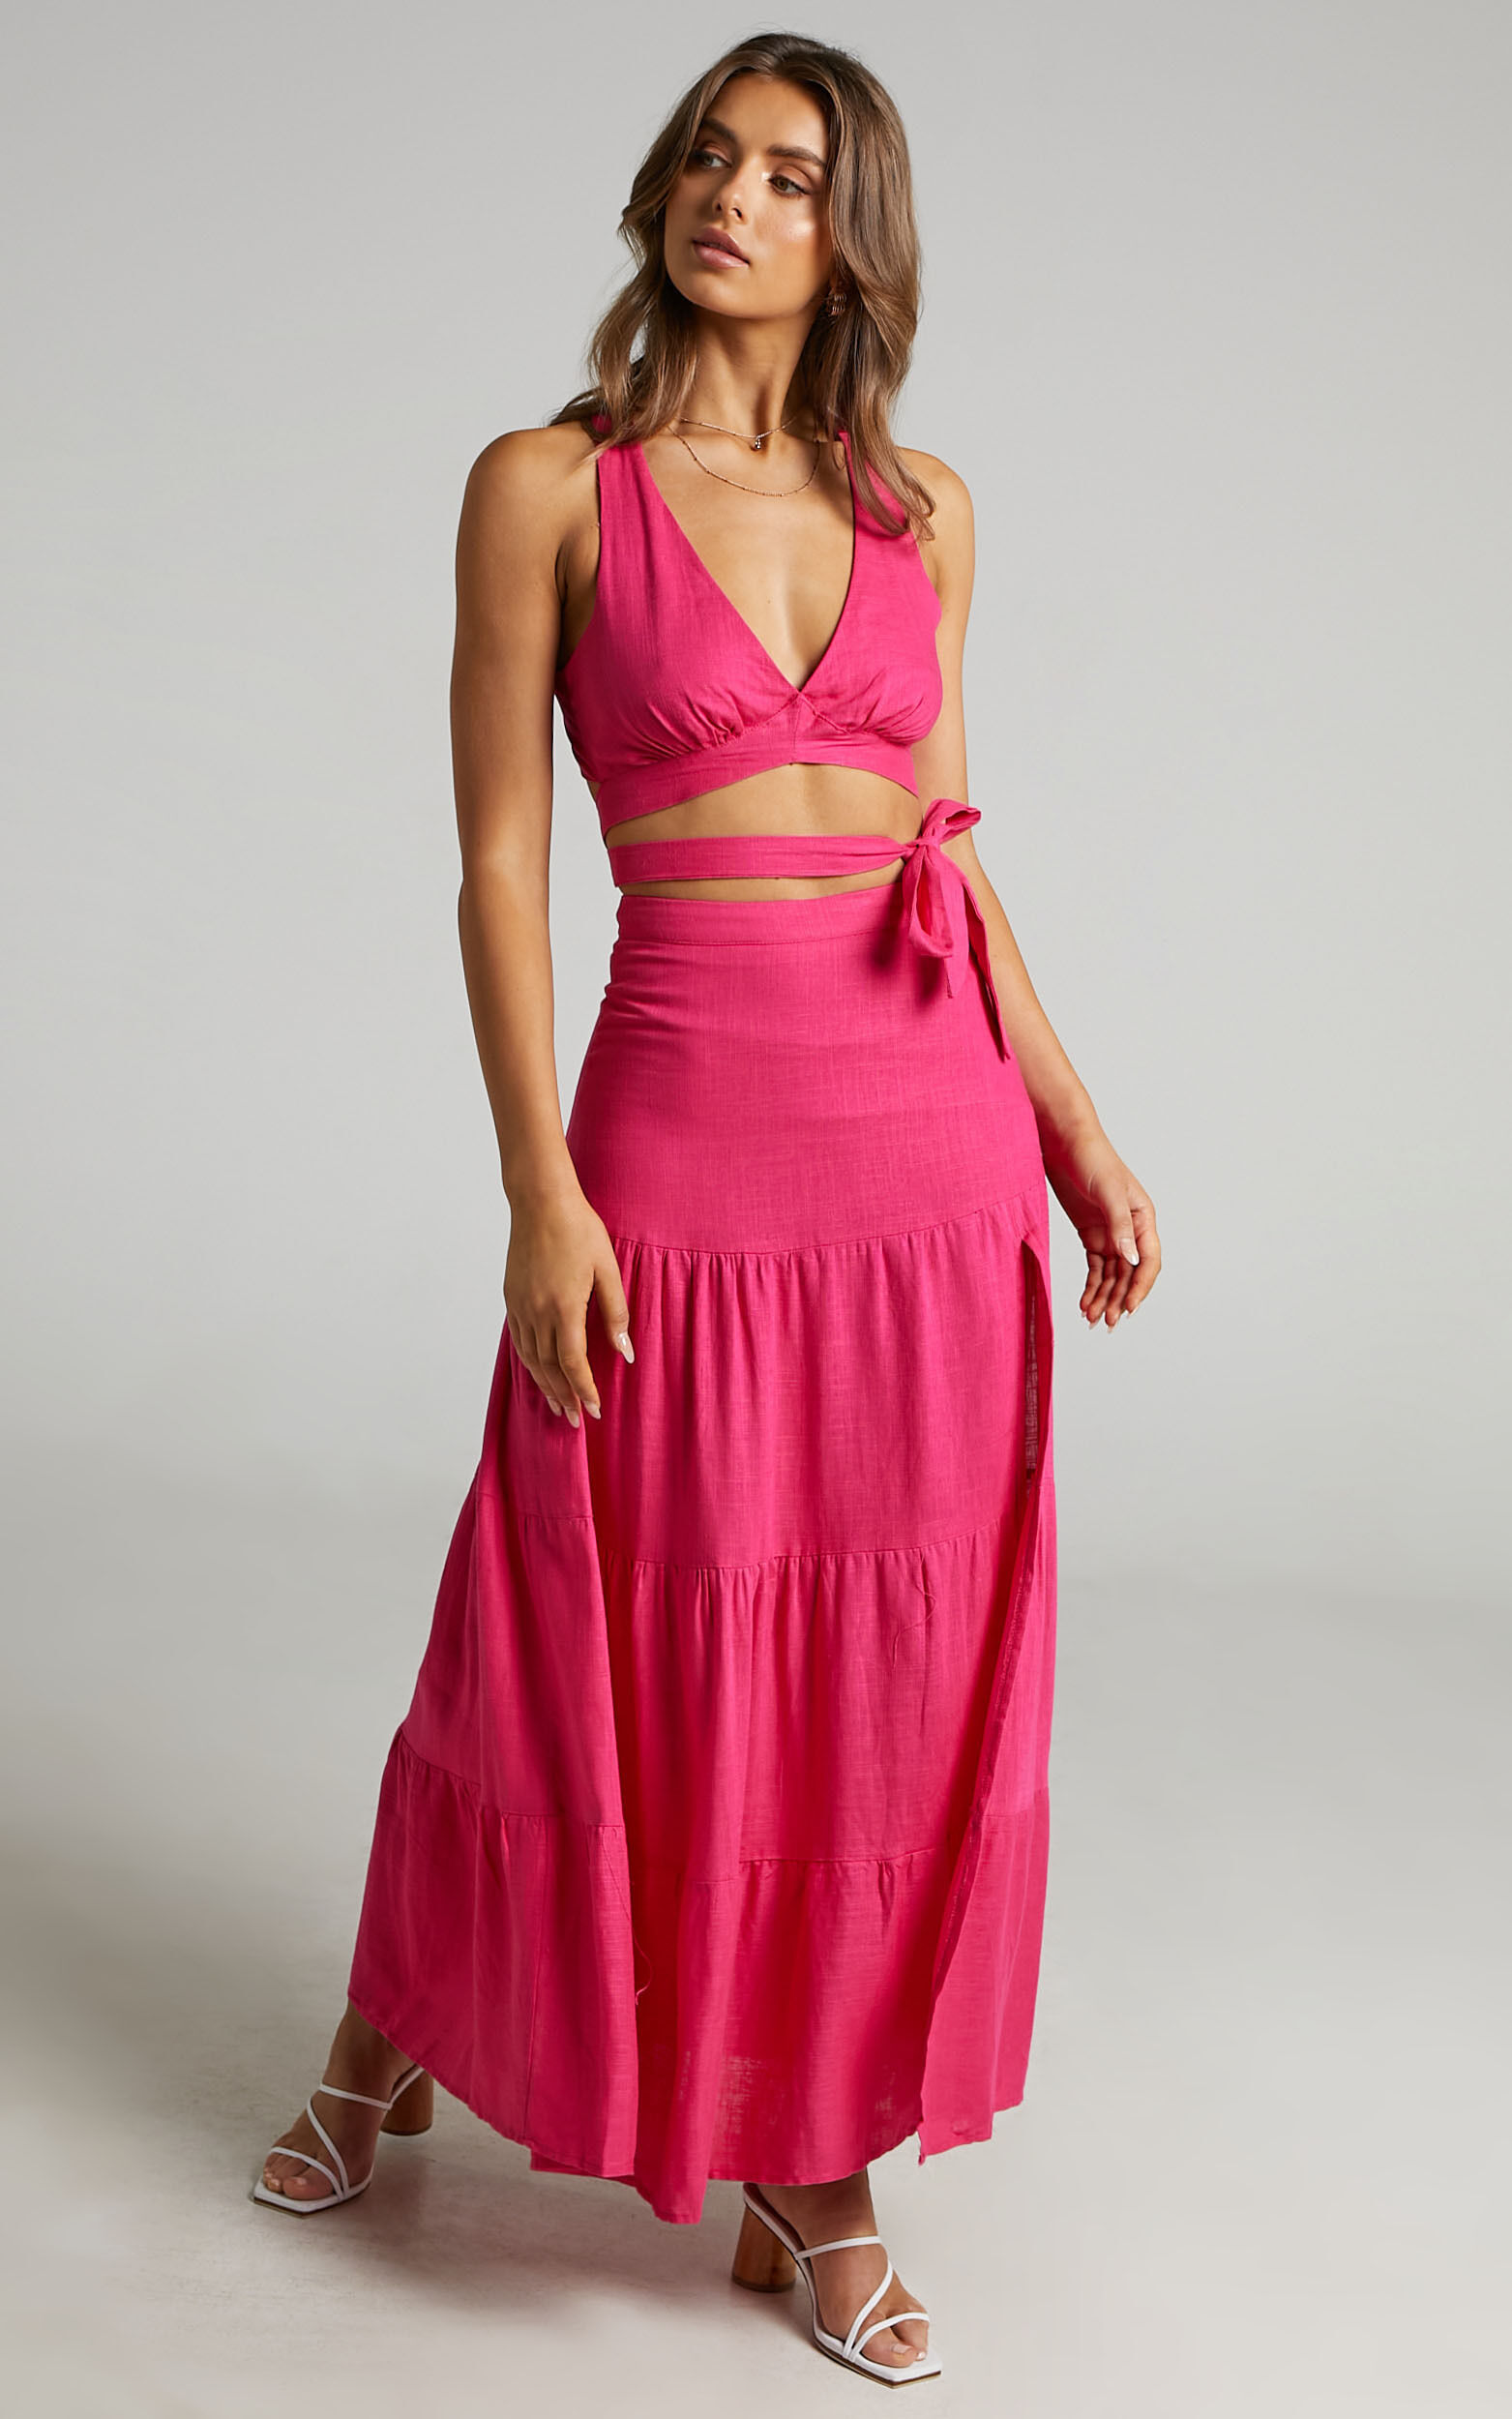 Delima Two Piece Set - Linen Look Cross Back Top and Thigh Split Midi Skirt in Hot Pink - 04, PNK1